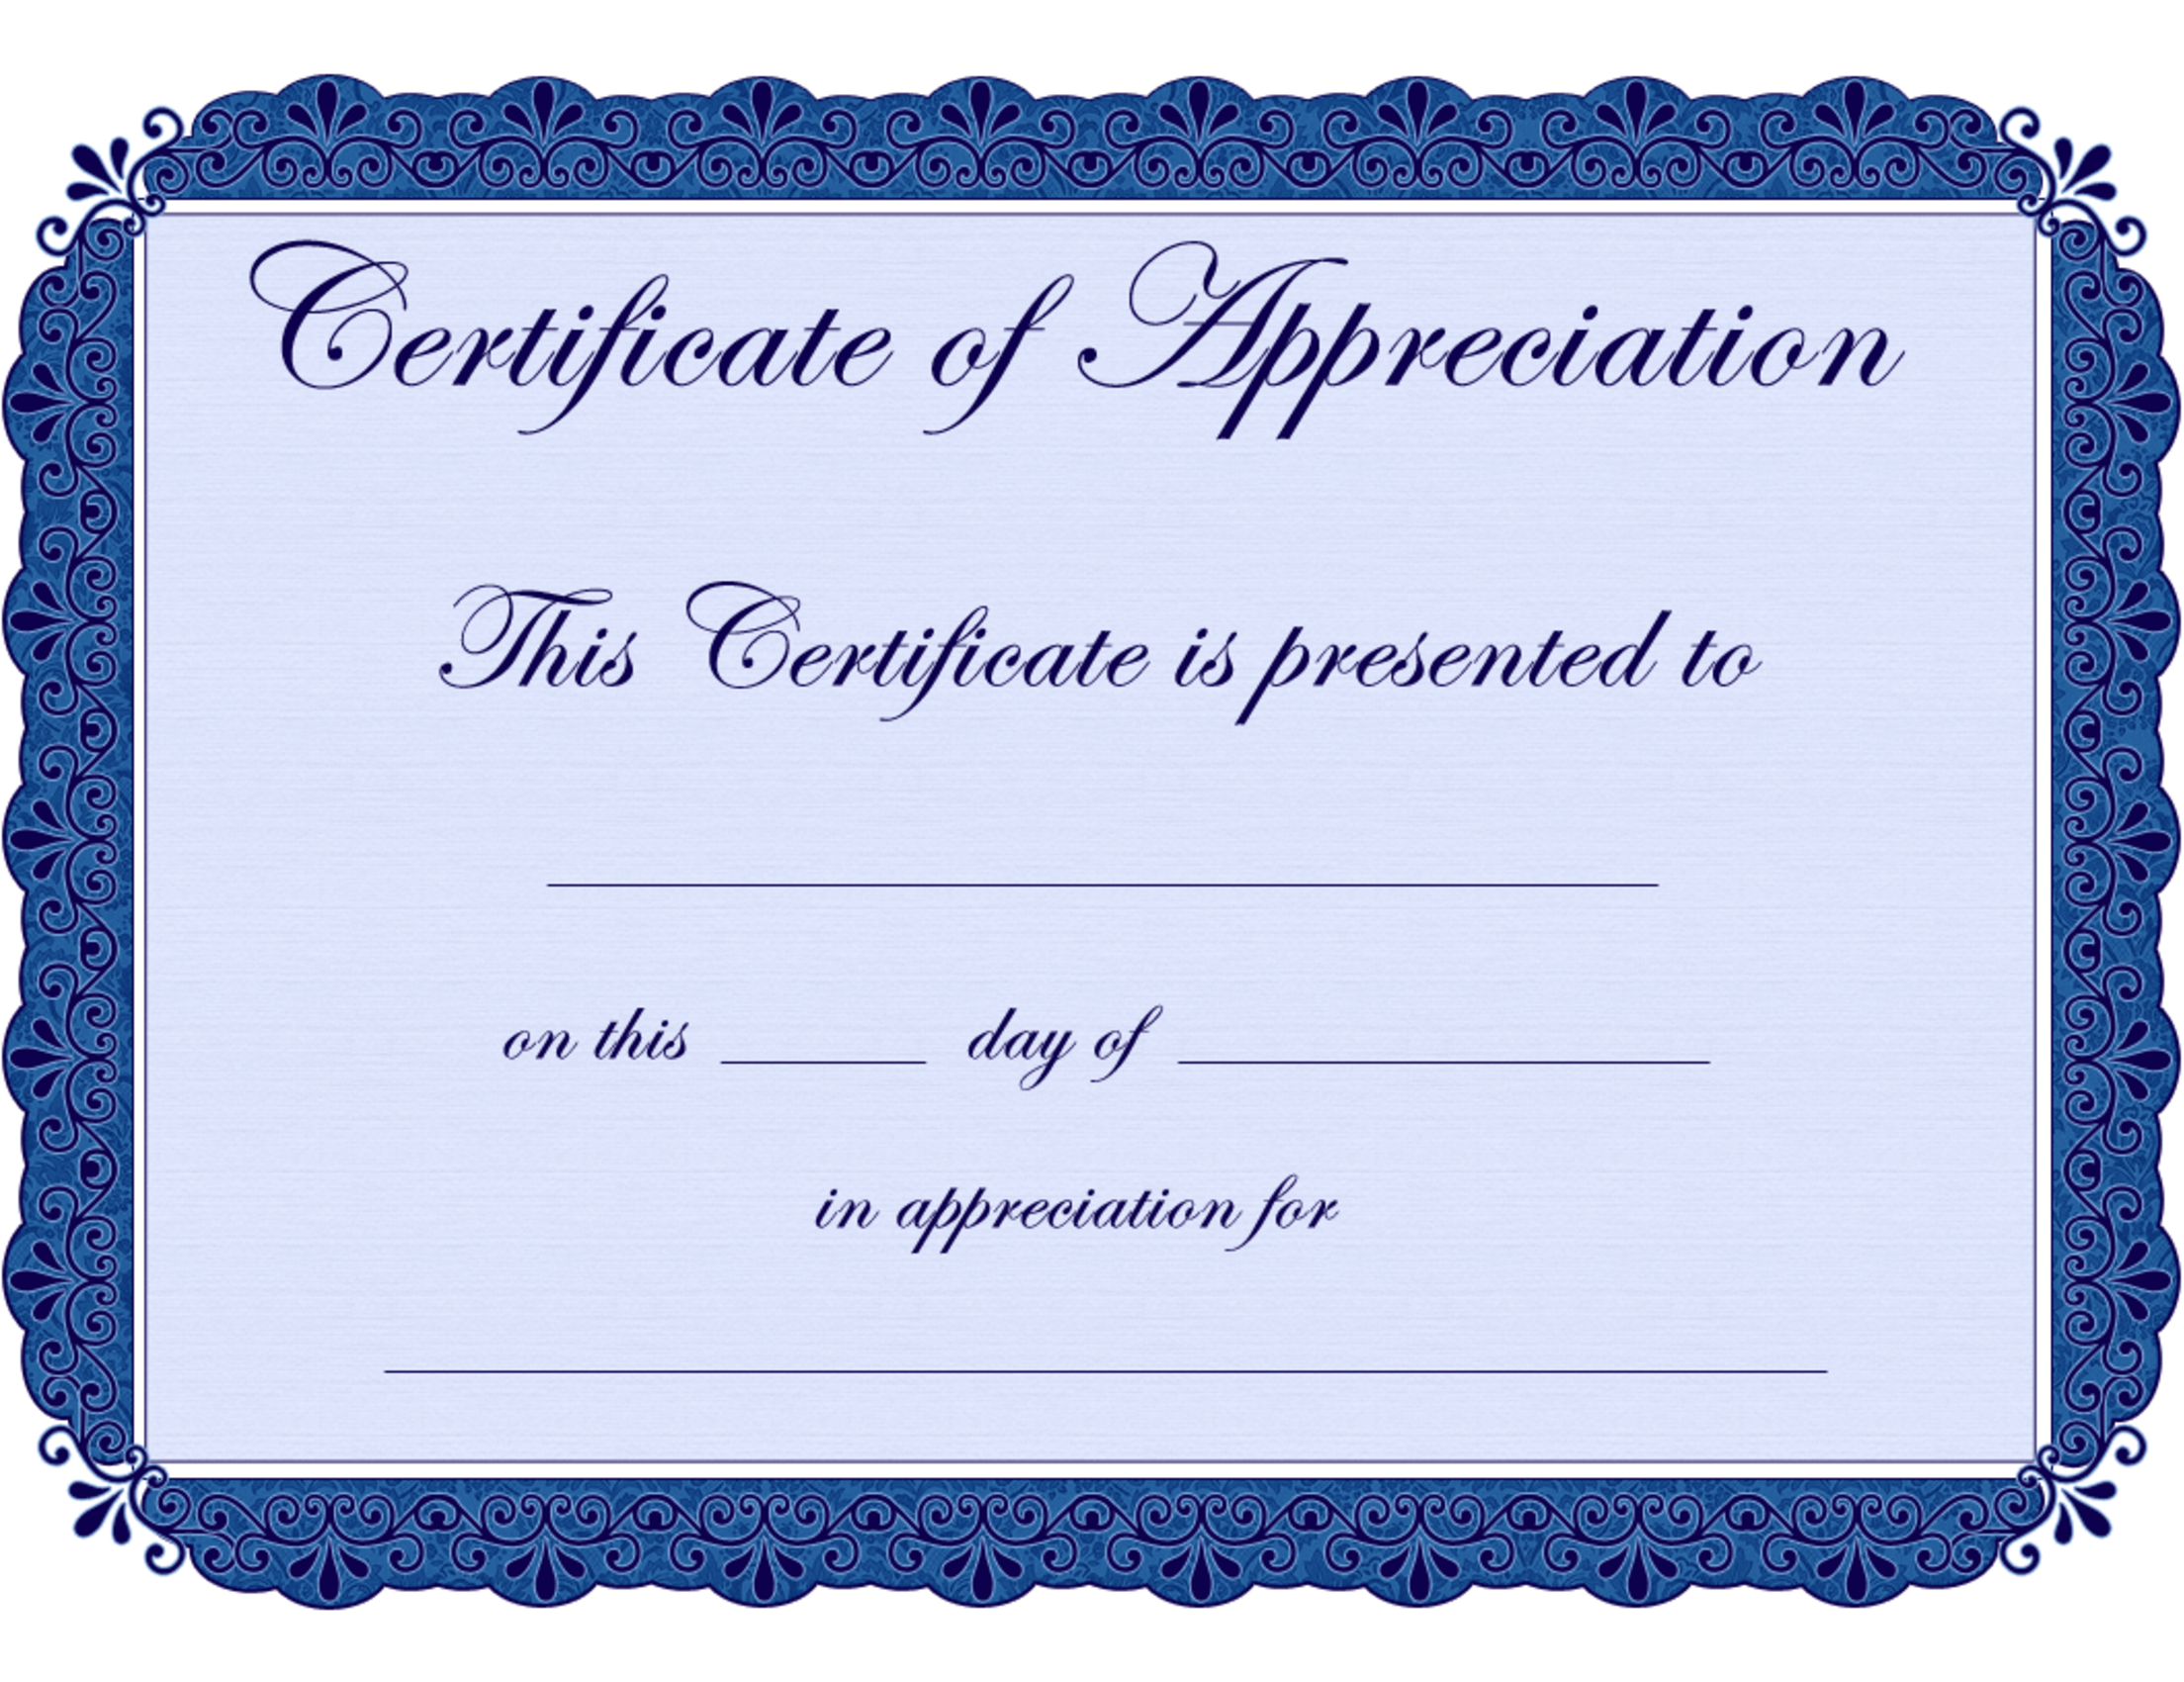 Free Printable Certificates Certificate Of Appreciation Certificate - Free Printable Templates For Certificates Of Recognition